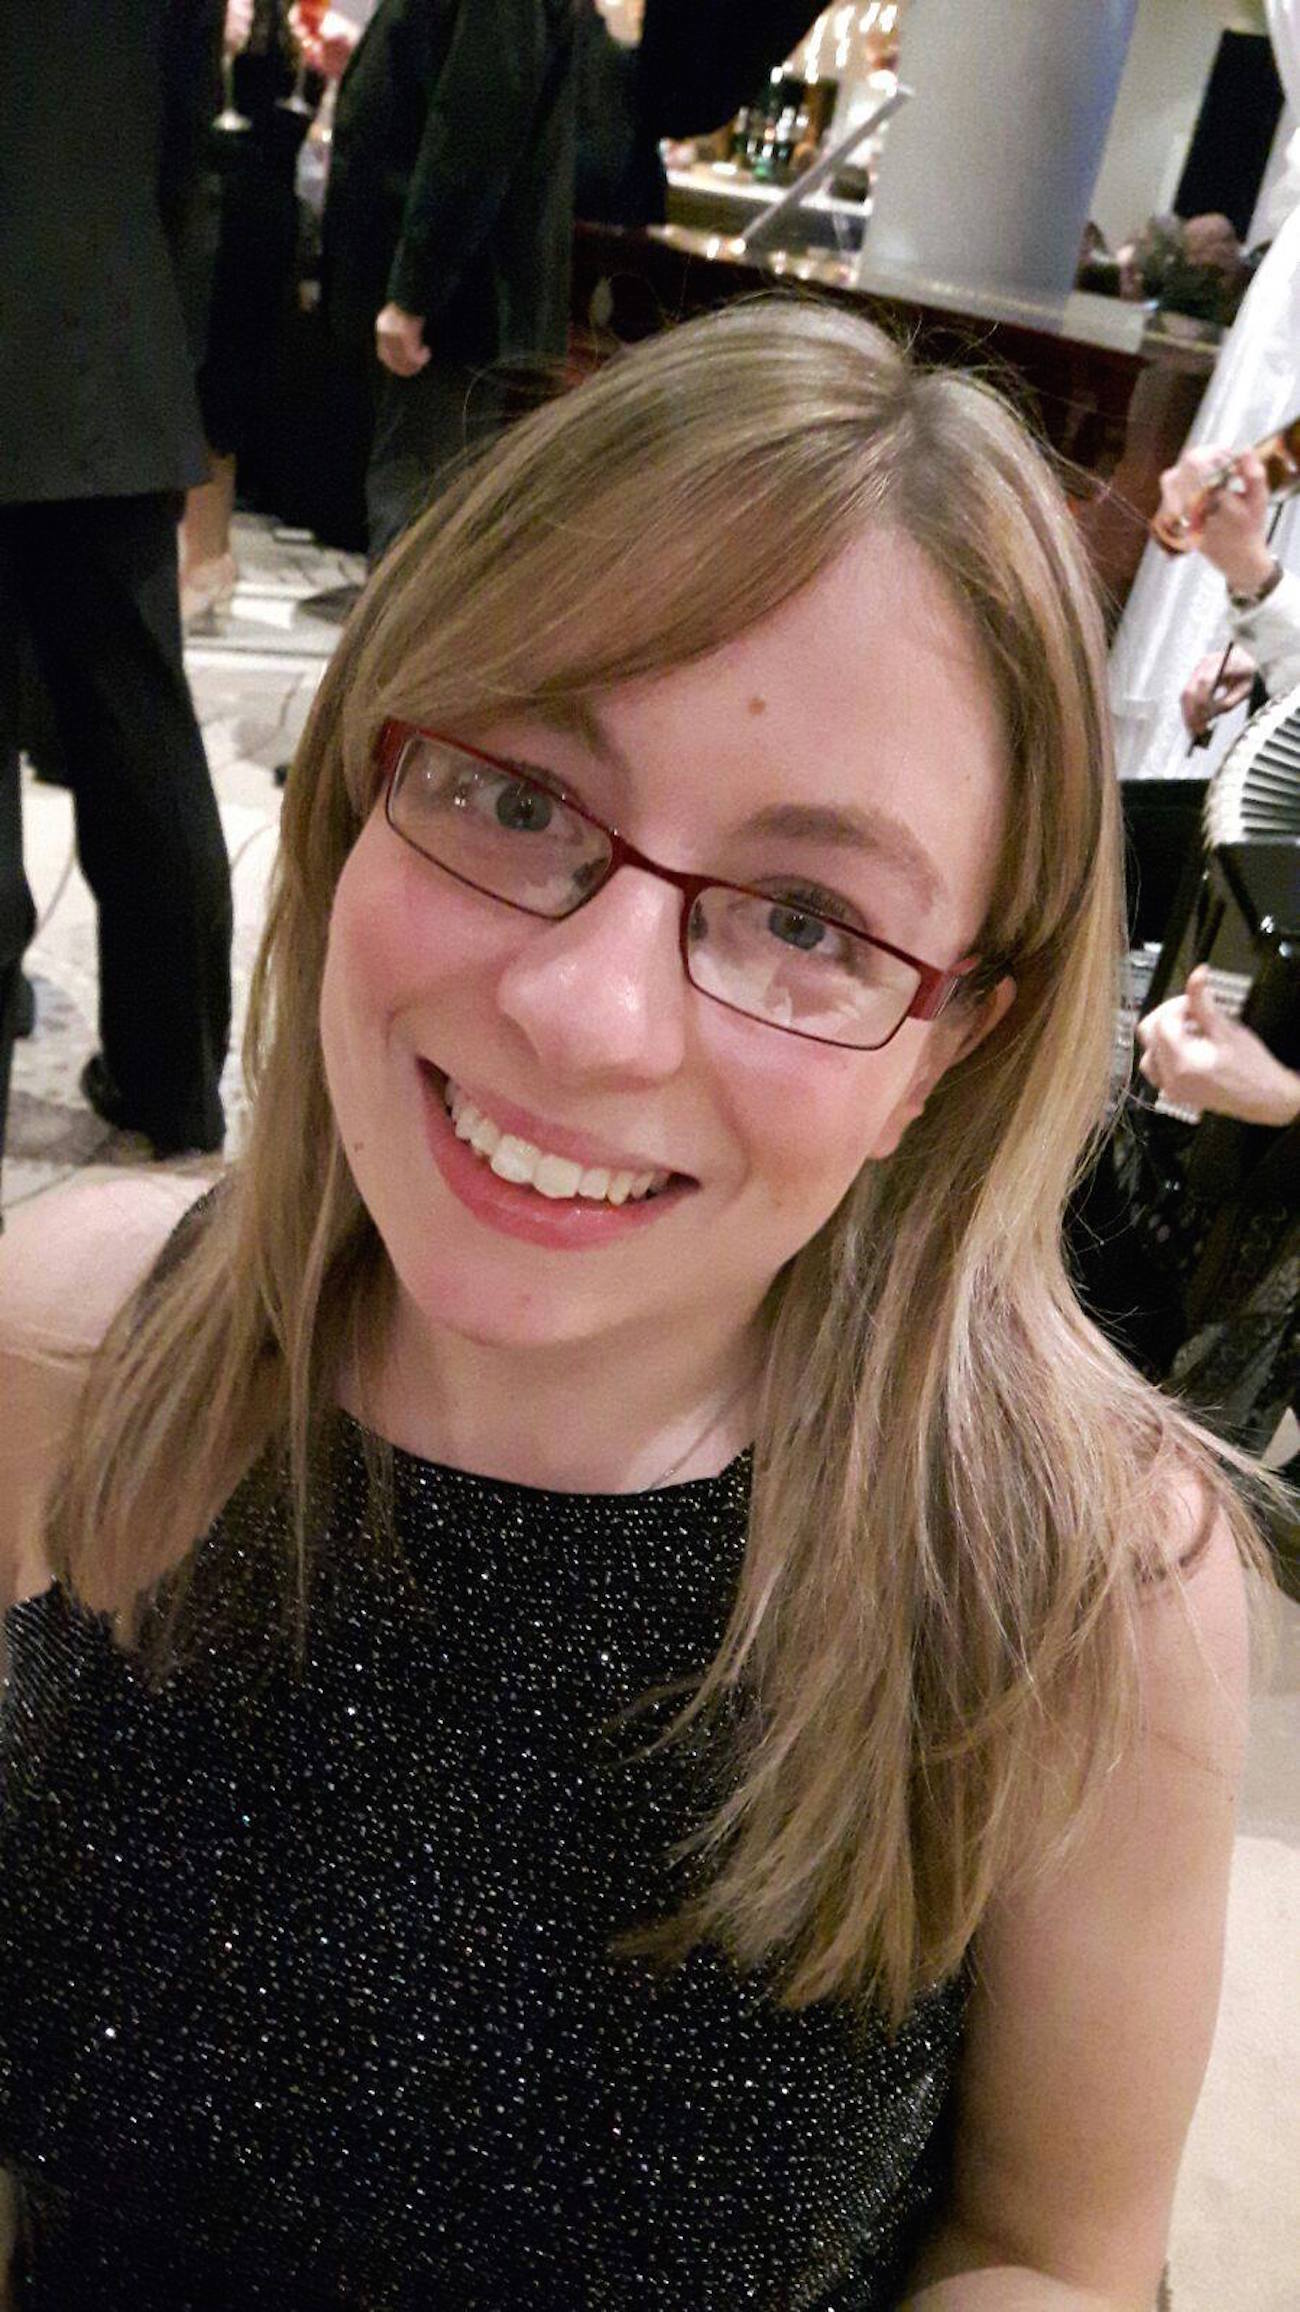 The author at a party smiling, wearing black top with silver glitter